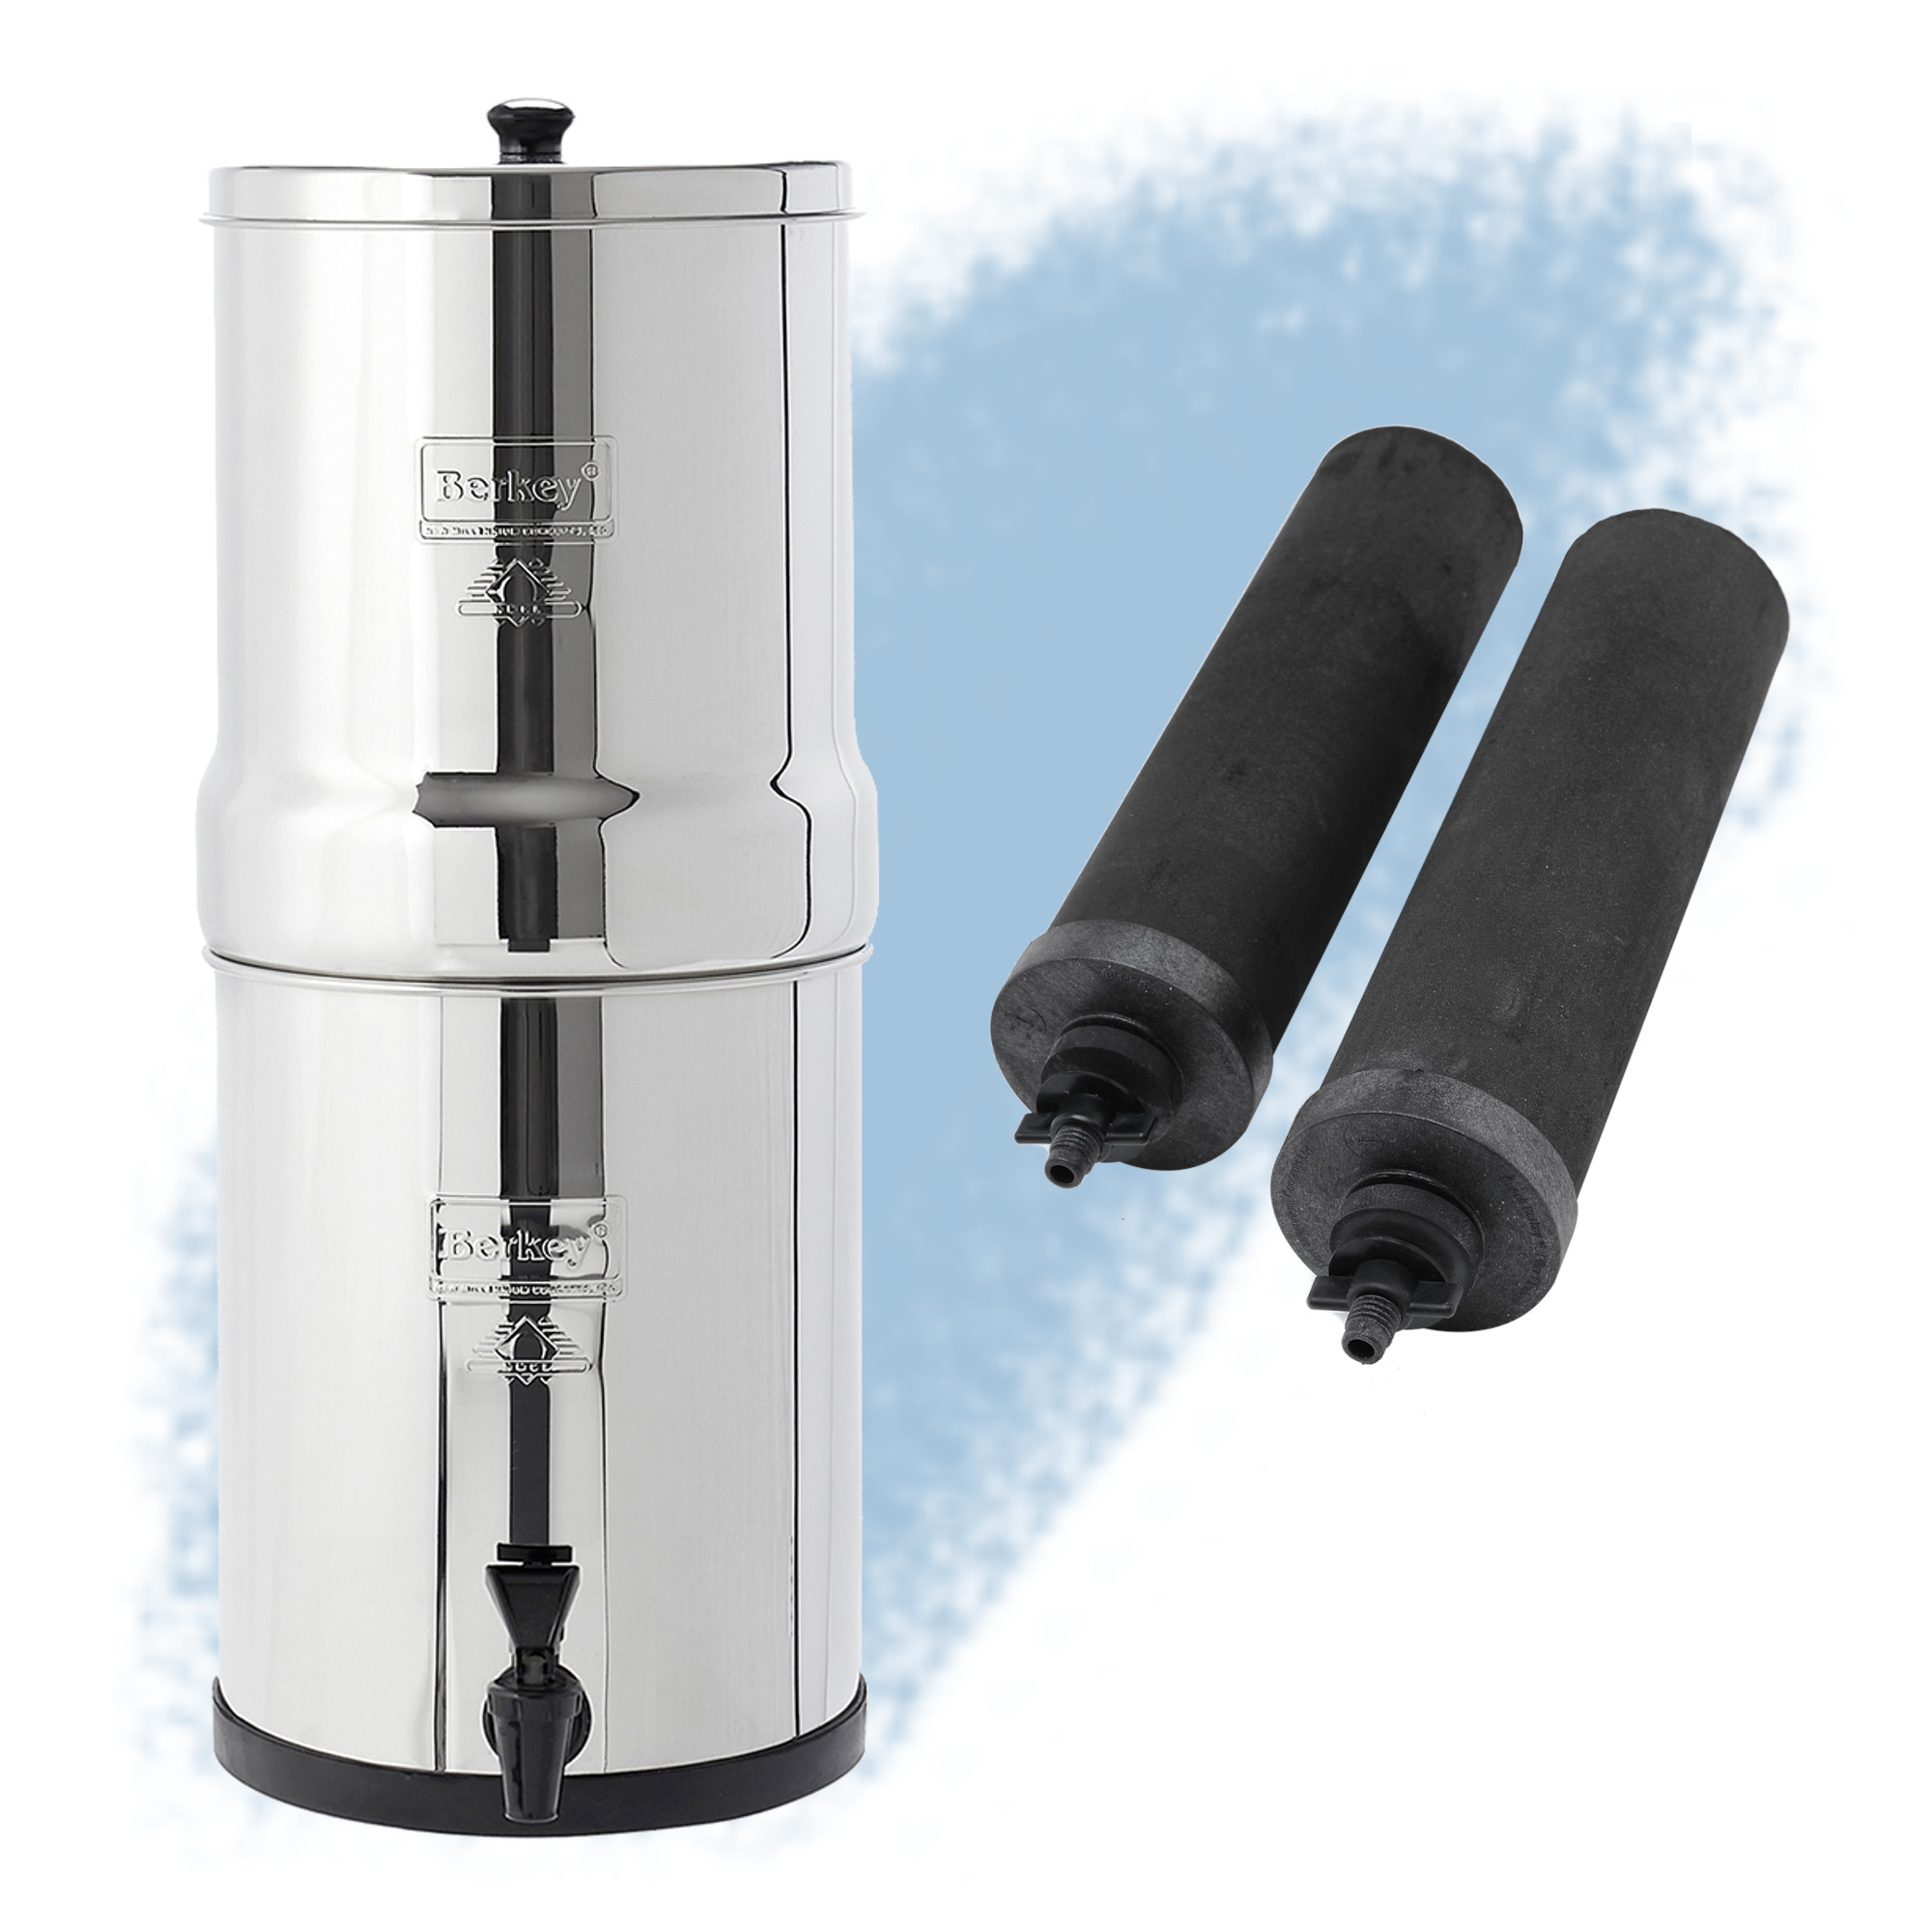 Big Berkey Water Filter Systems - For the Love of Clean Water